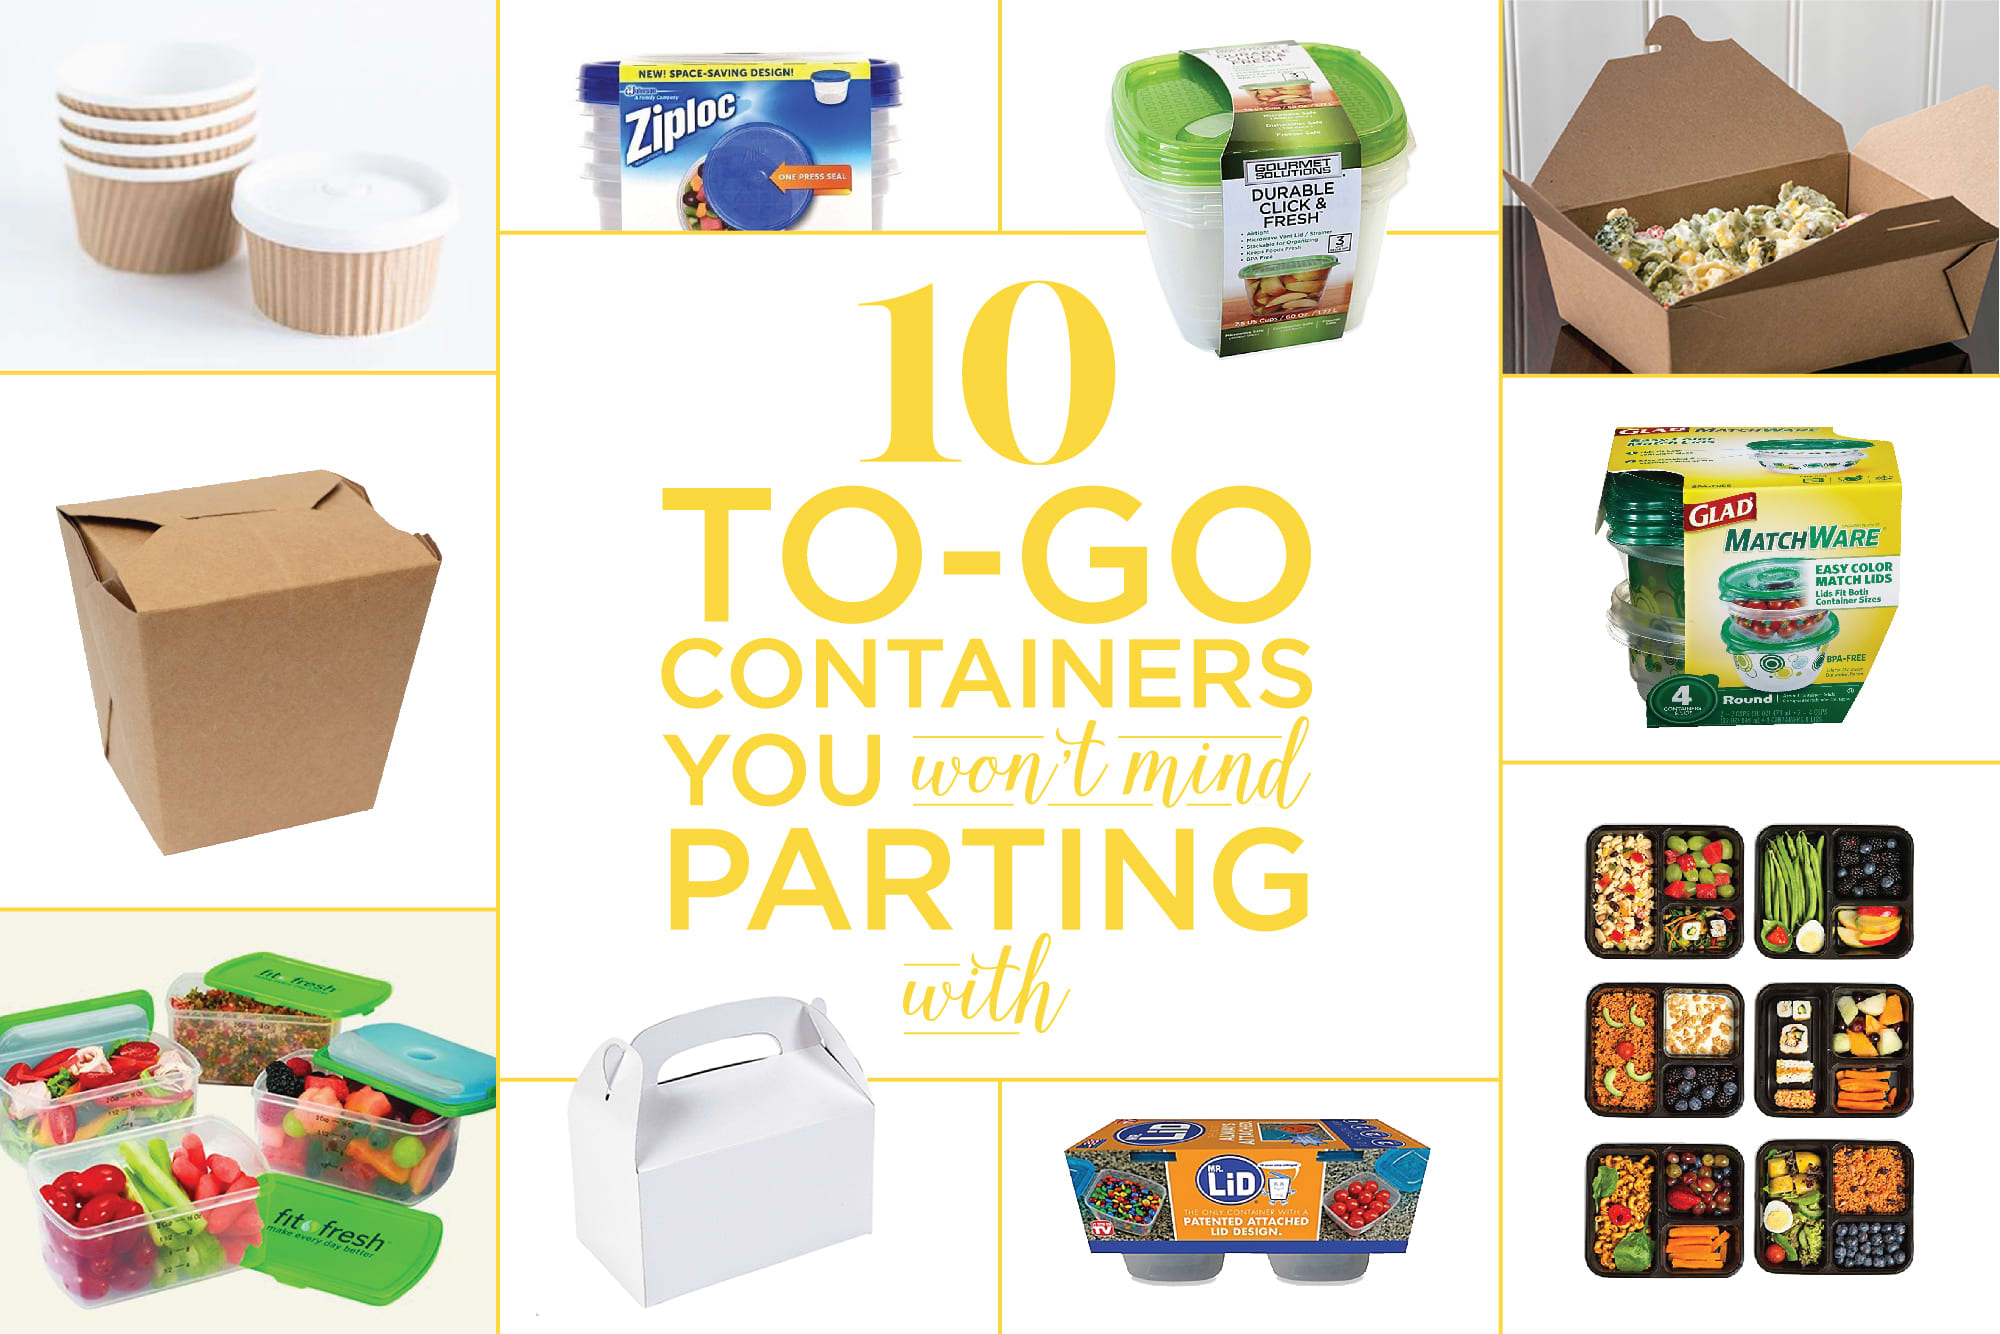 Are Your Takeout Containers Vented? Why Vented Food Packaging Matters